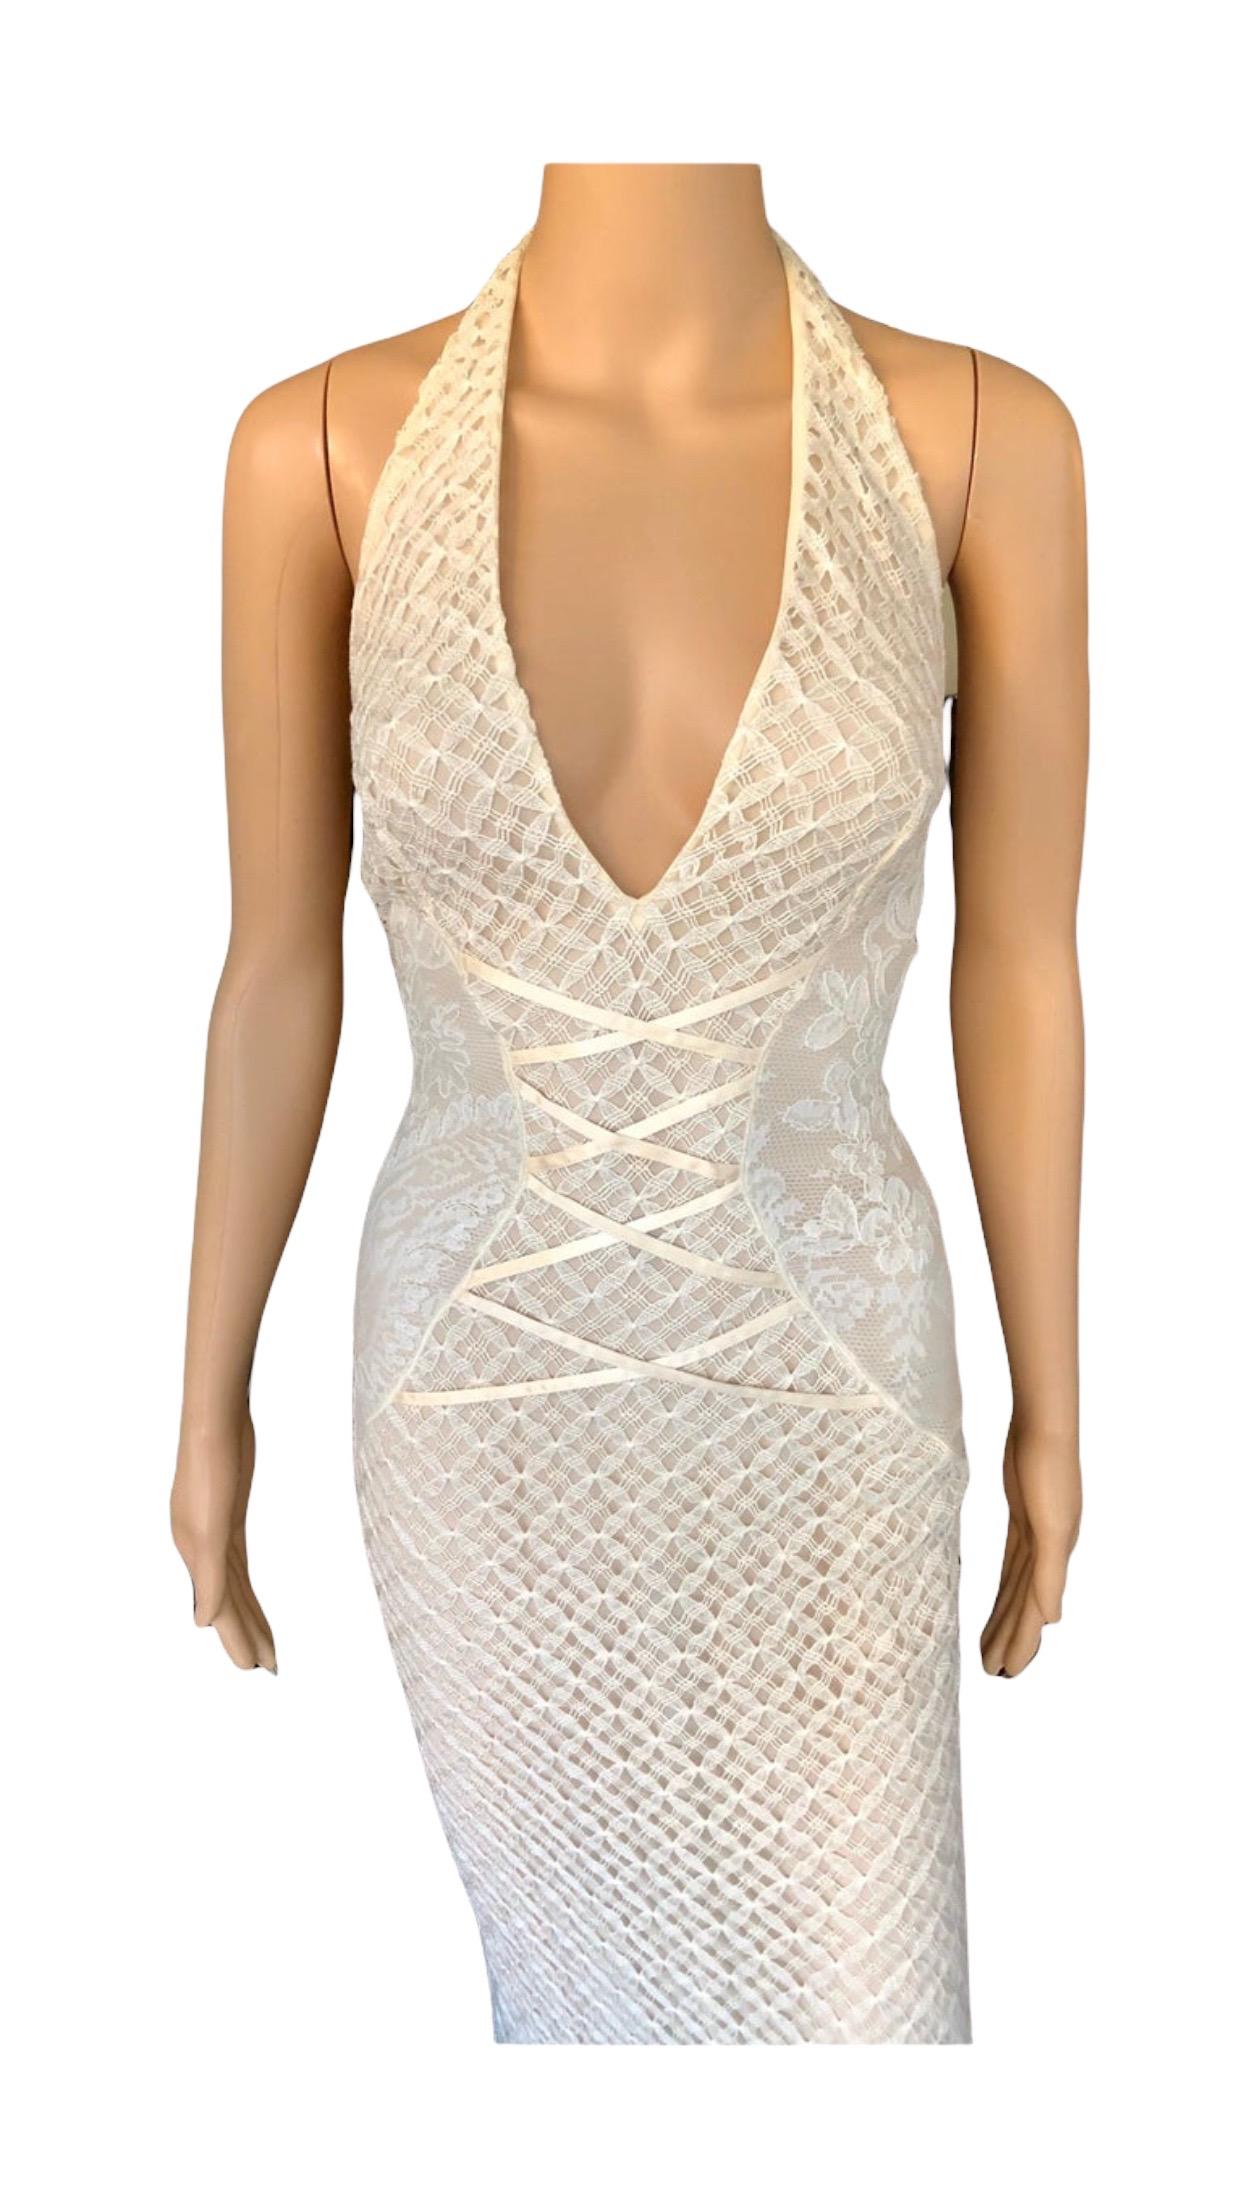 NWT Gianni Versace S/S 2002 Plunging Backless Semi Sheer Lace Ivory Dress Gown For Sale 5